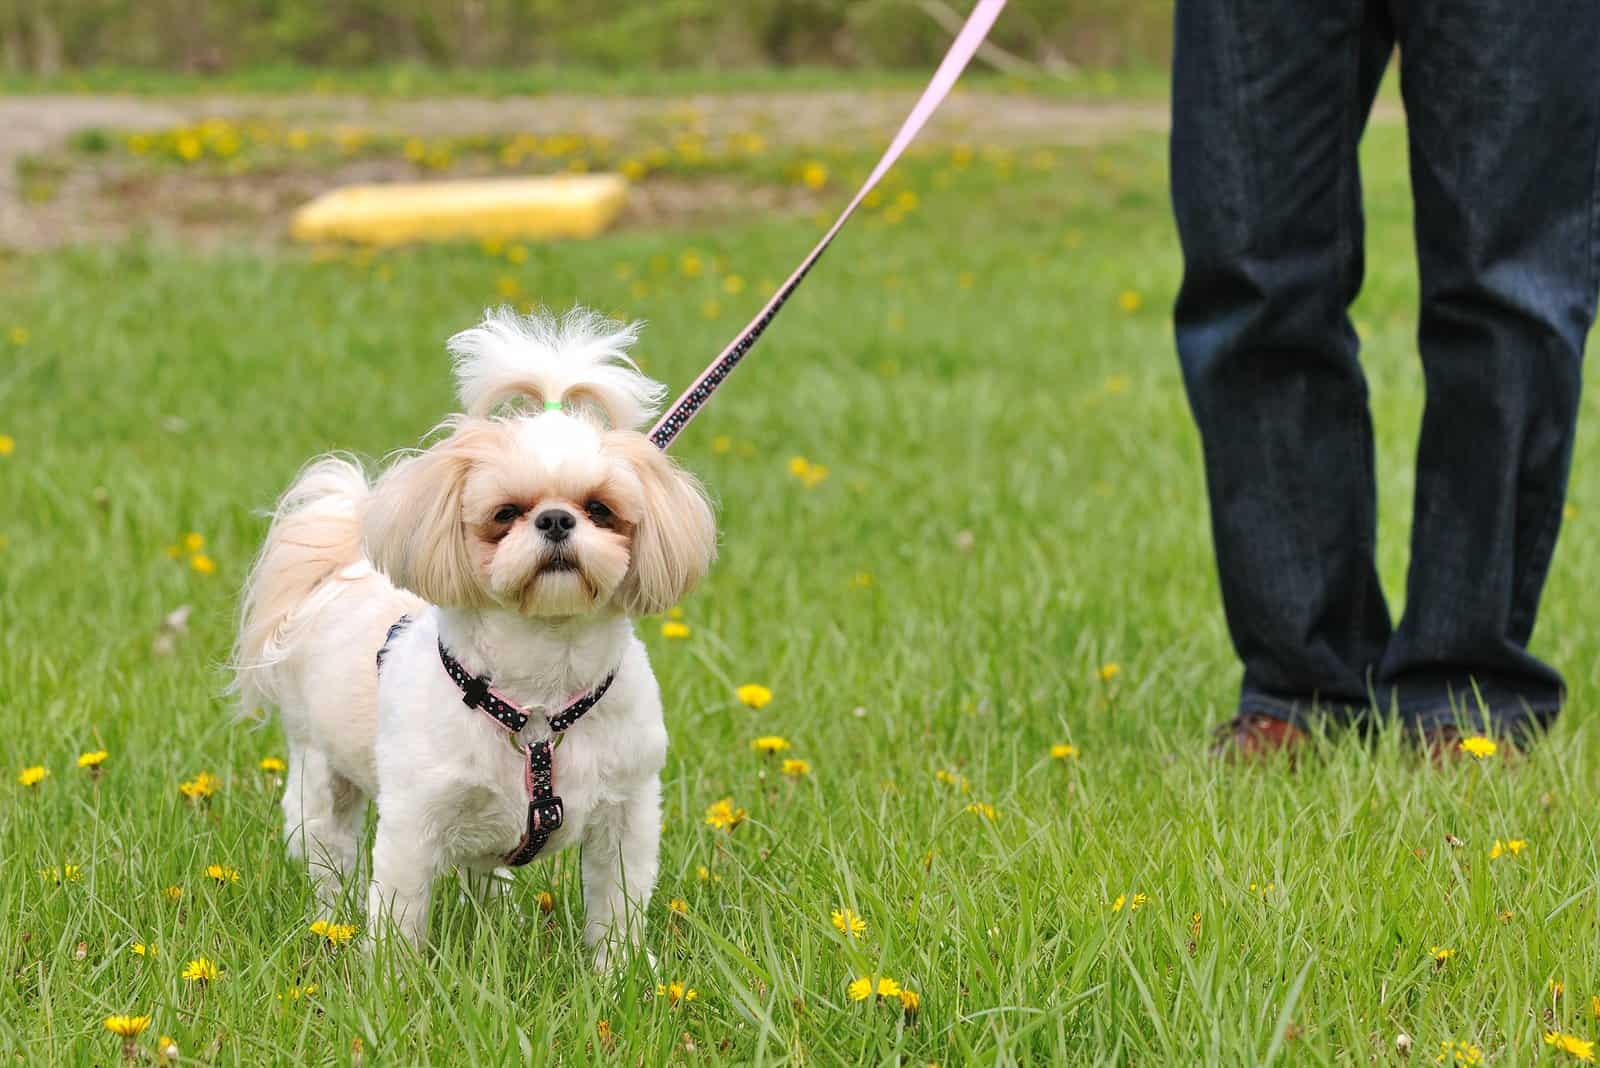 Shih Tzu hurts on a leash on the grass